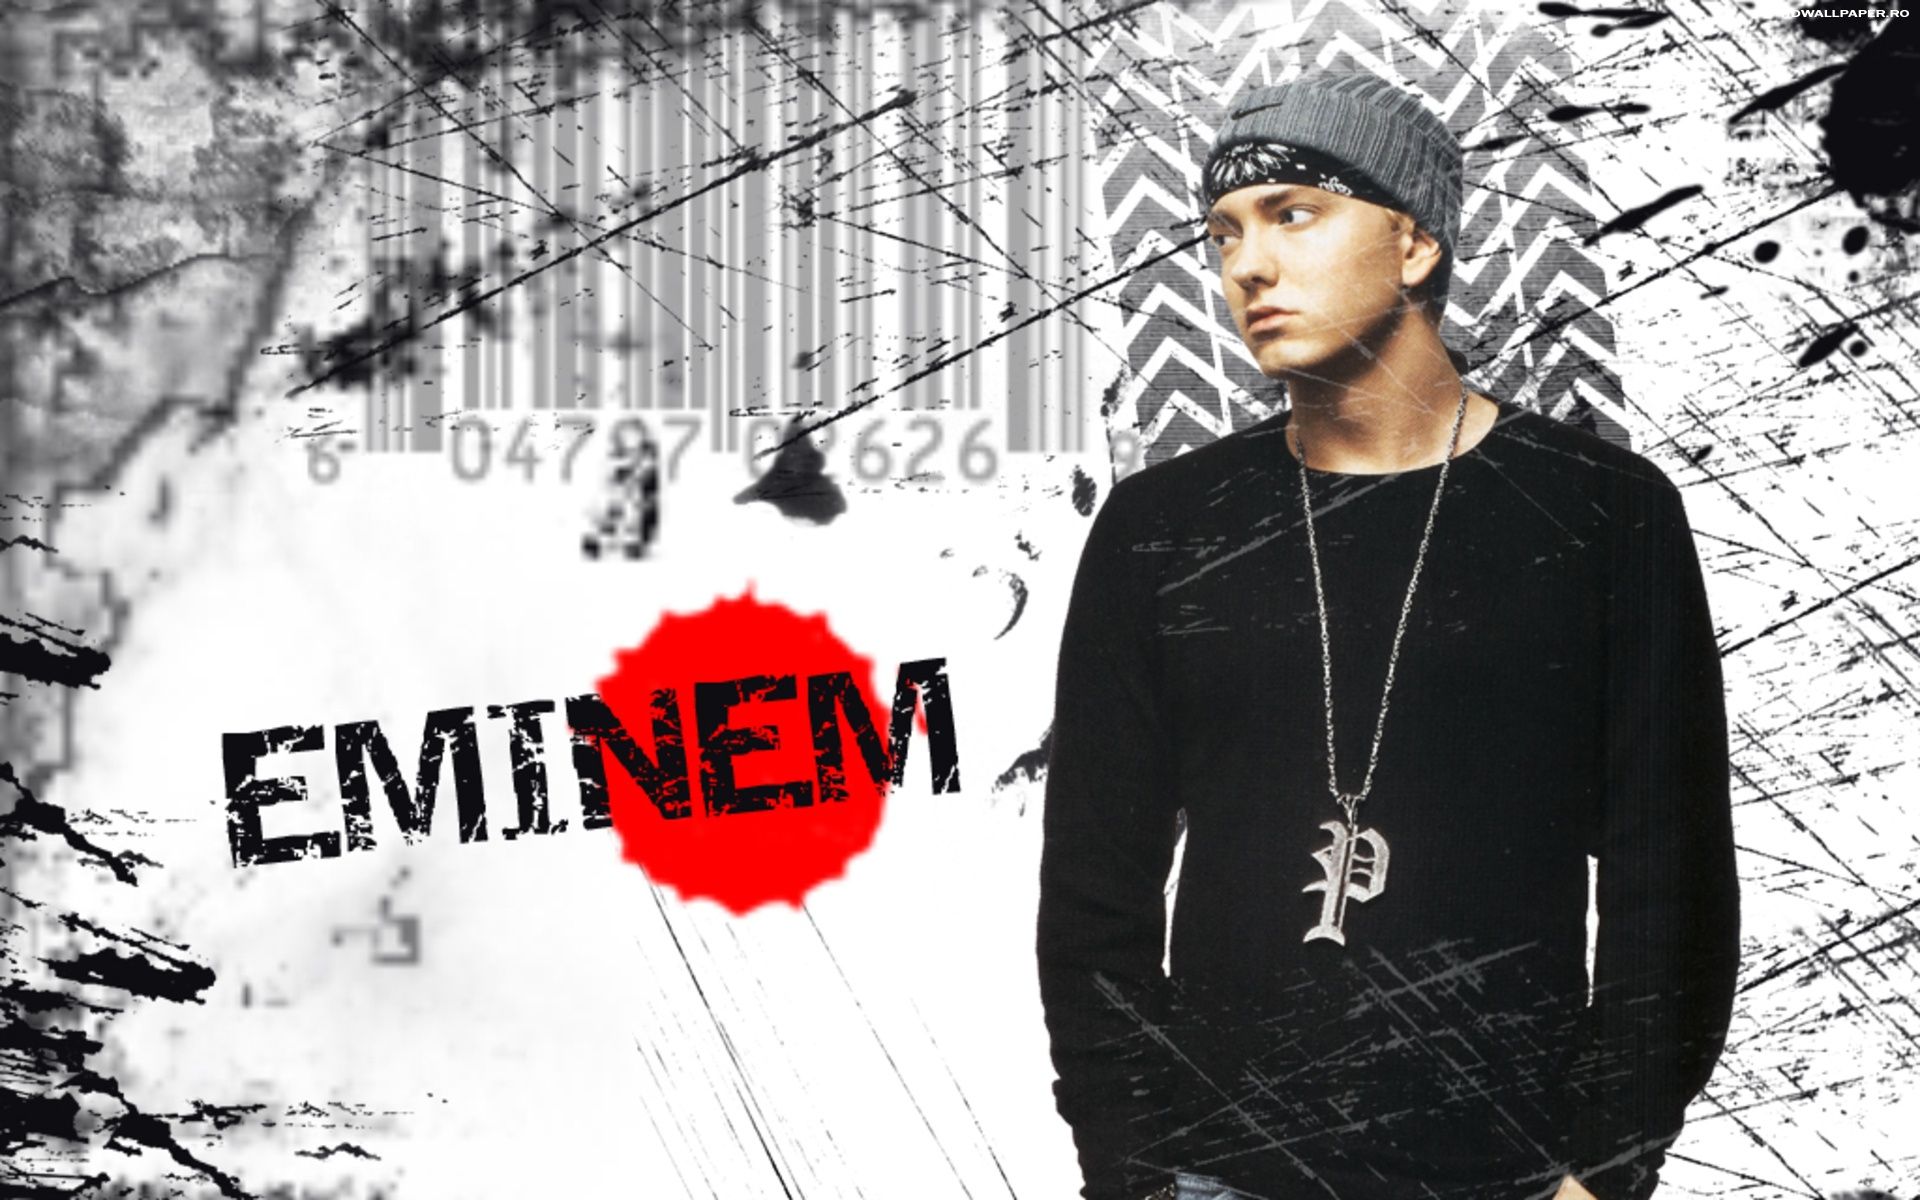 Eminem Wallpaper HD Background Covers iPhones